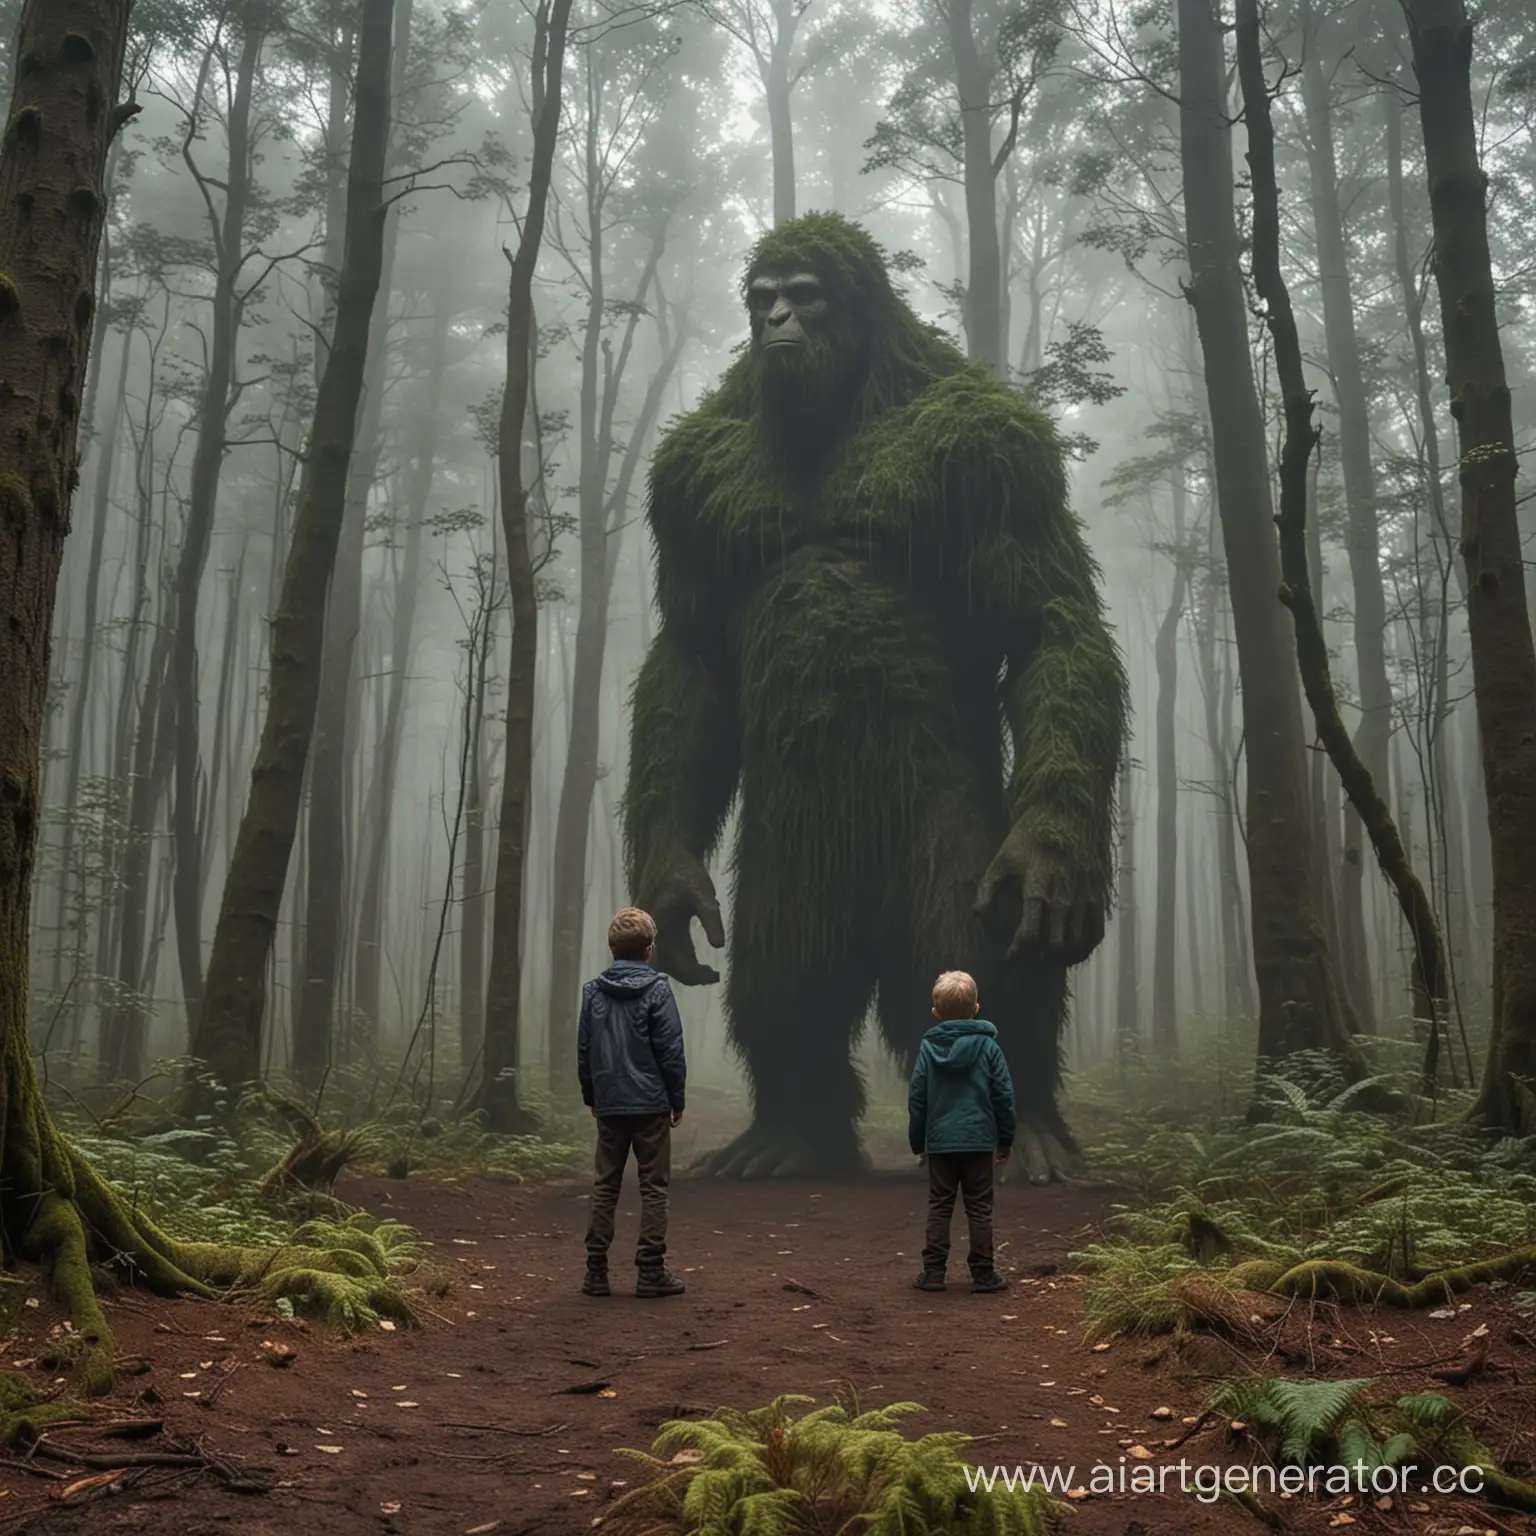 Exploring-Brothers-Encounter-Enormous-Giant-in-Enchanted-Woods